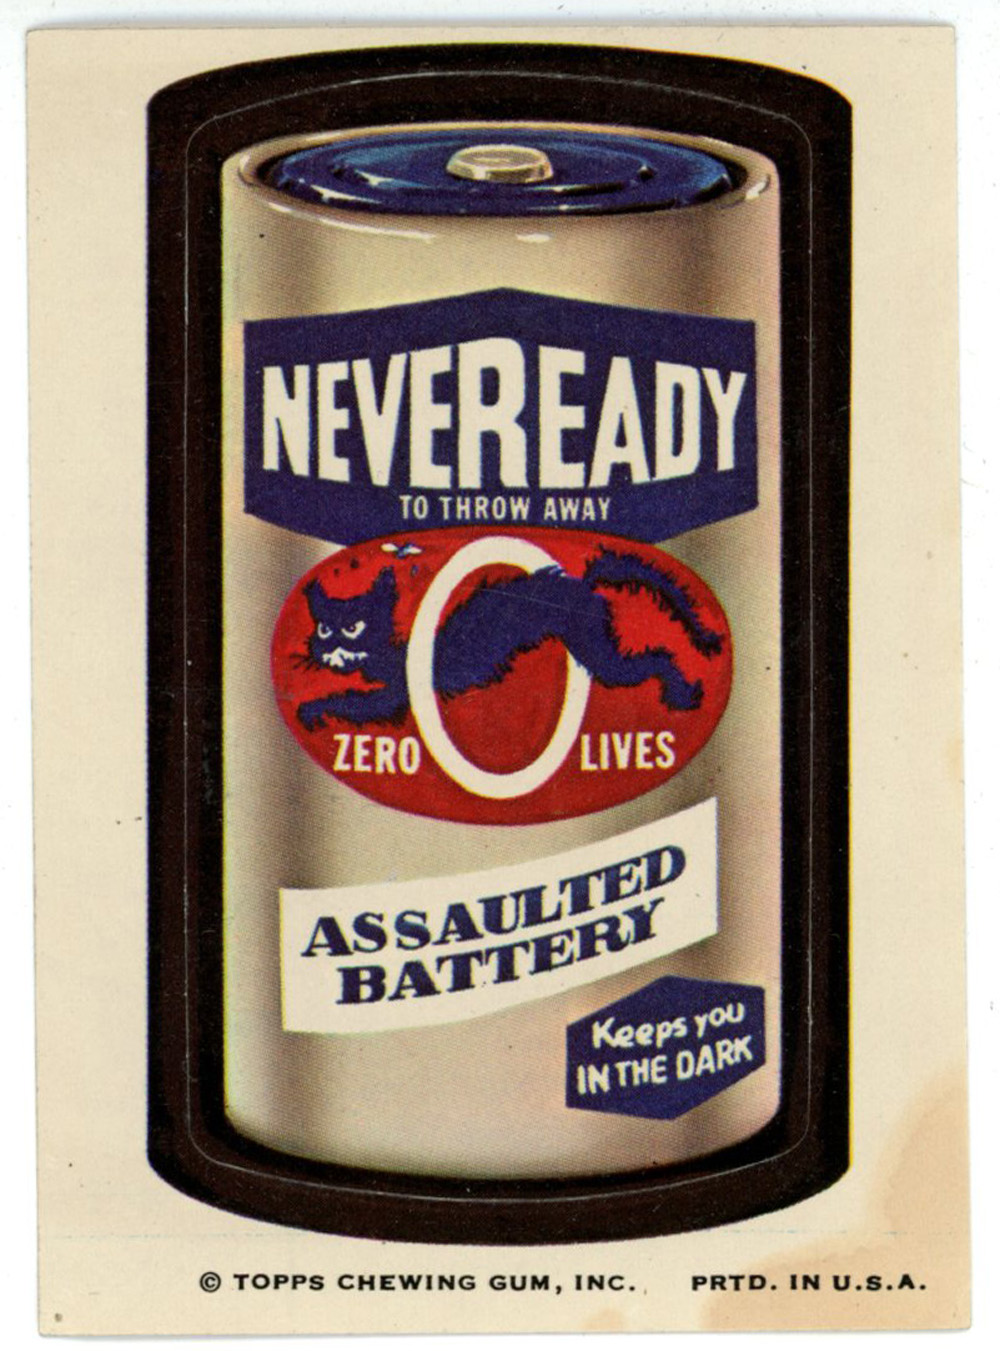 1973 Topps Wacky Packages Series 1 Neveready Battery